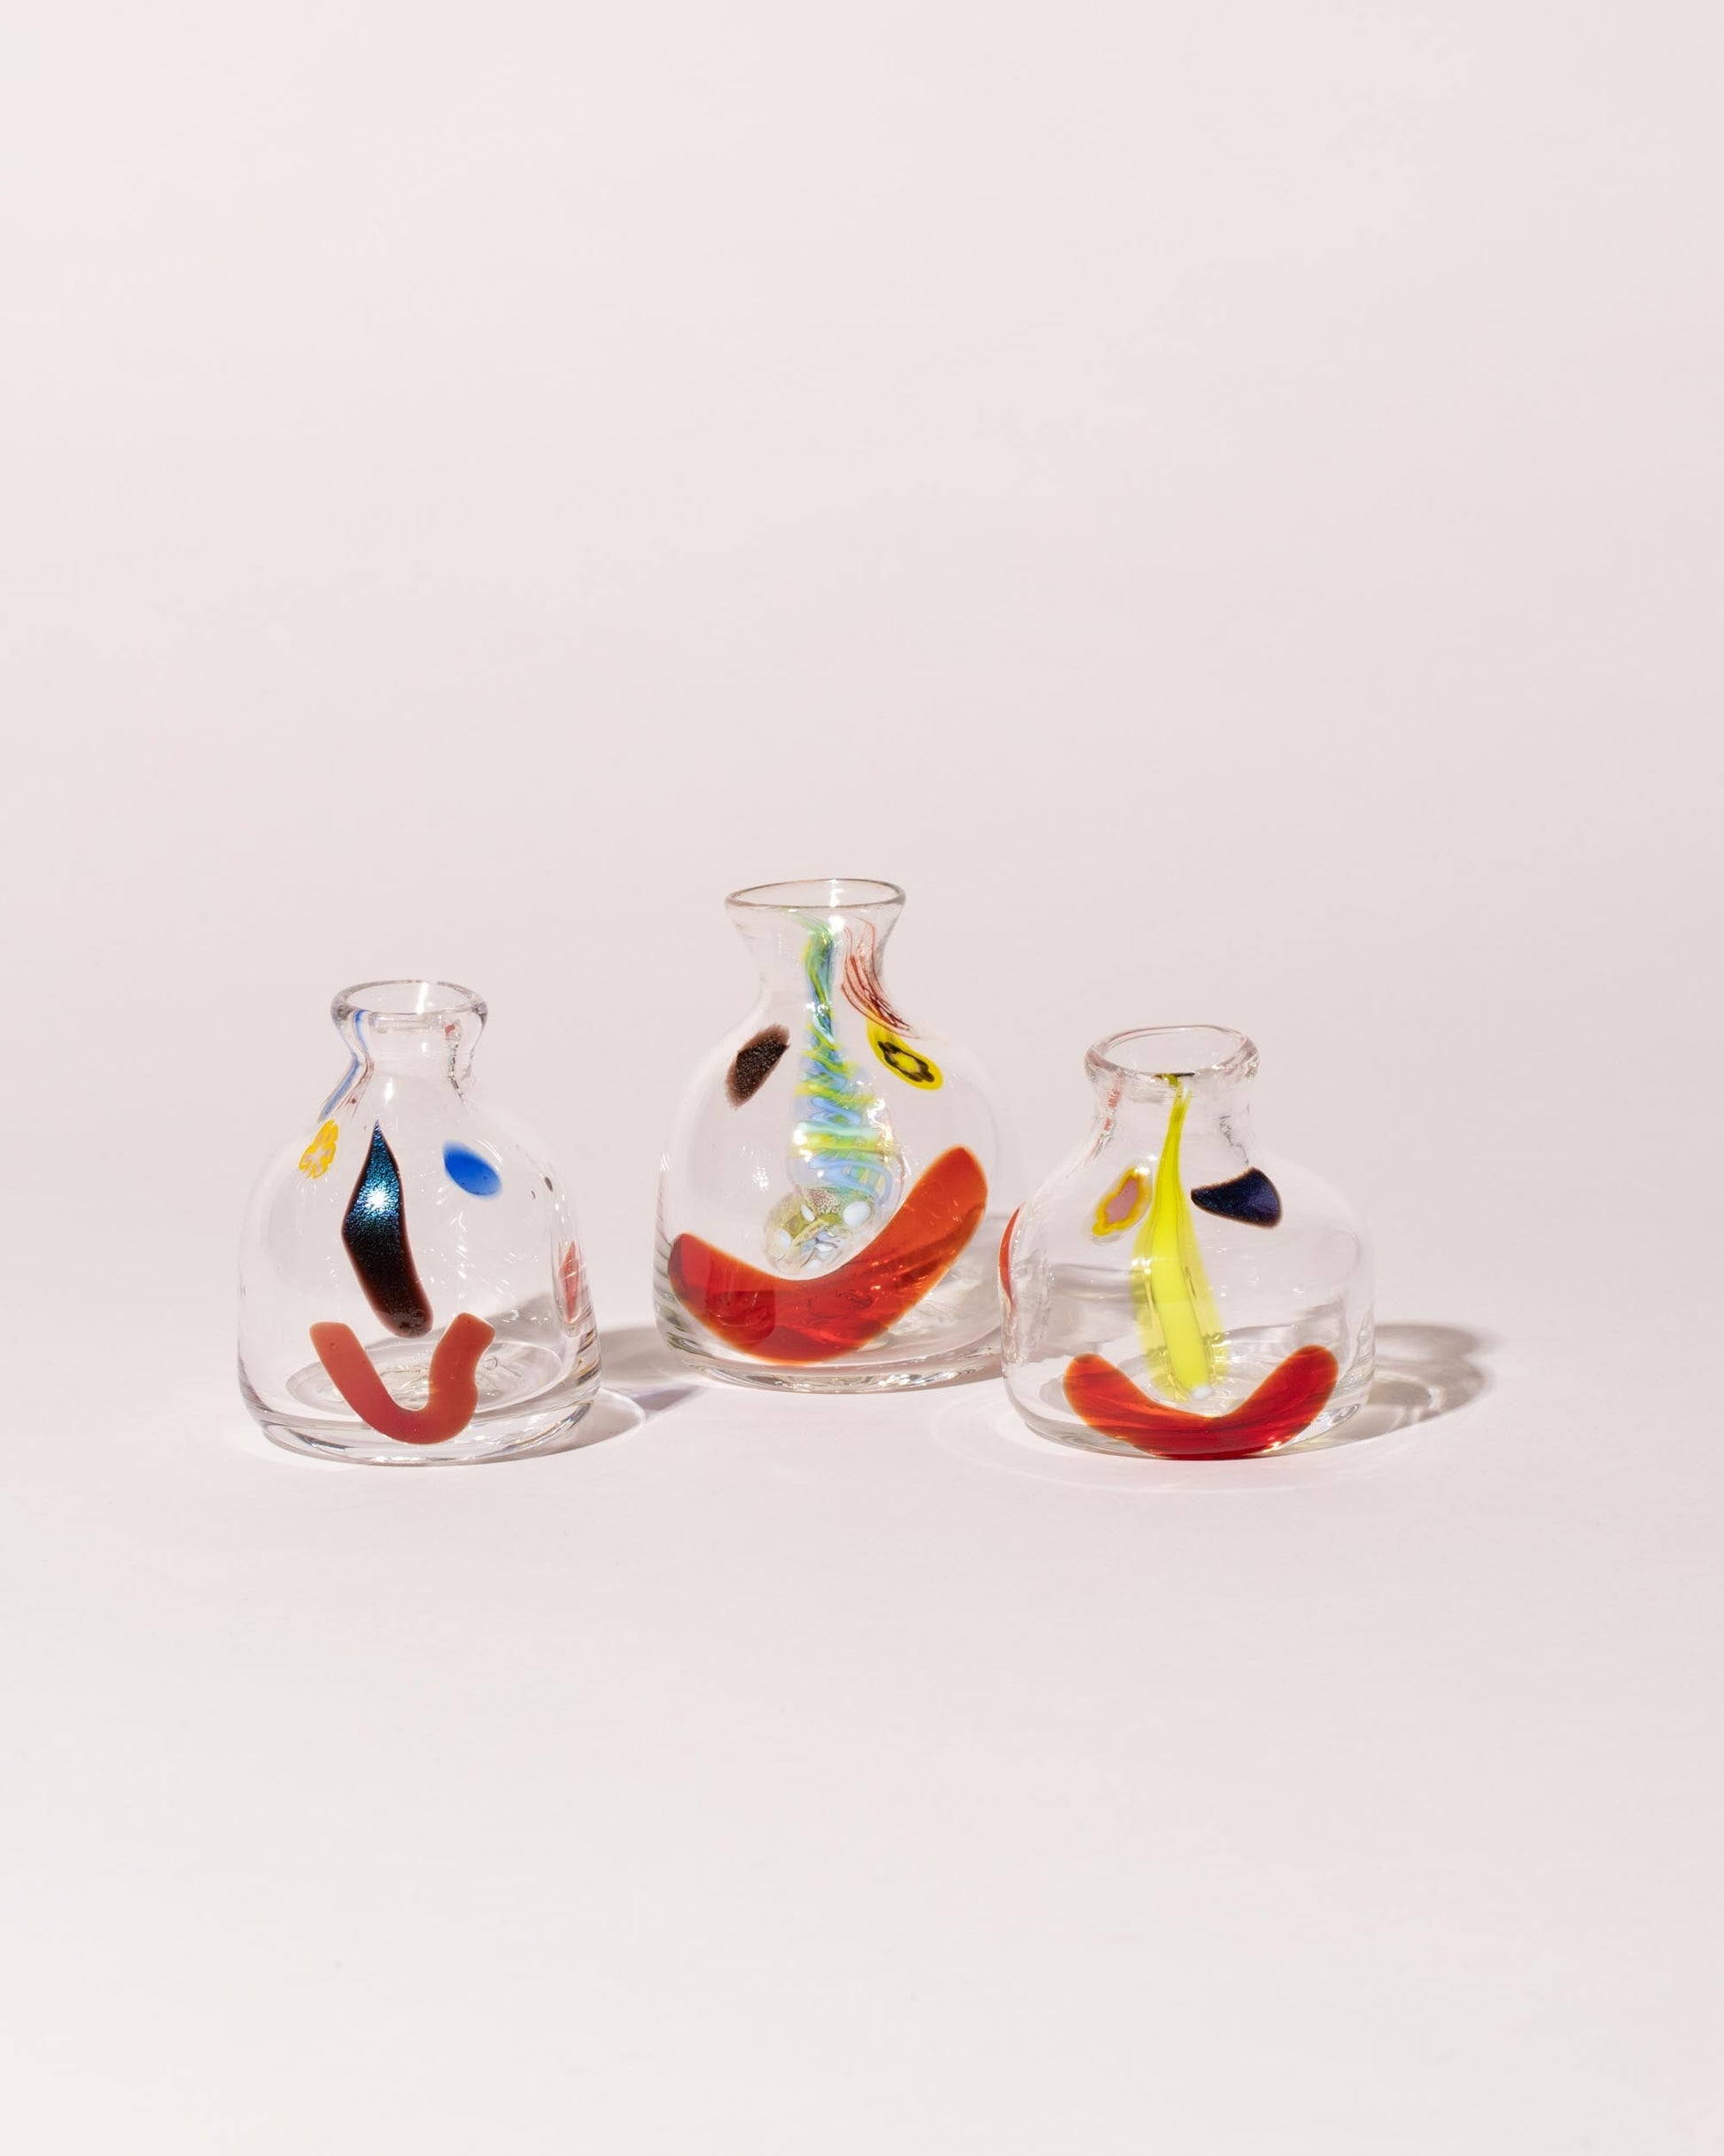 Group of FACEVESSEL Small Bud Vases on light color background.